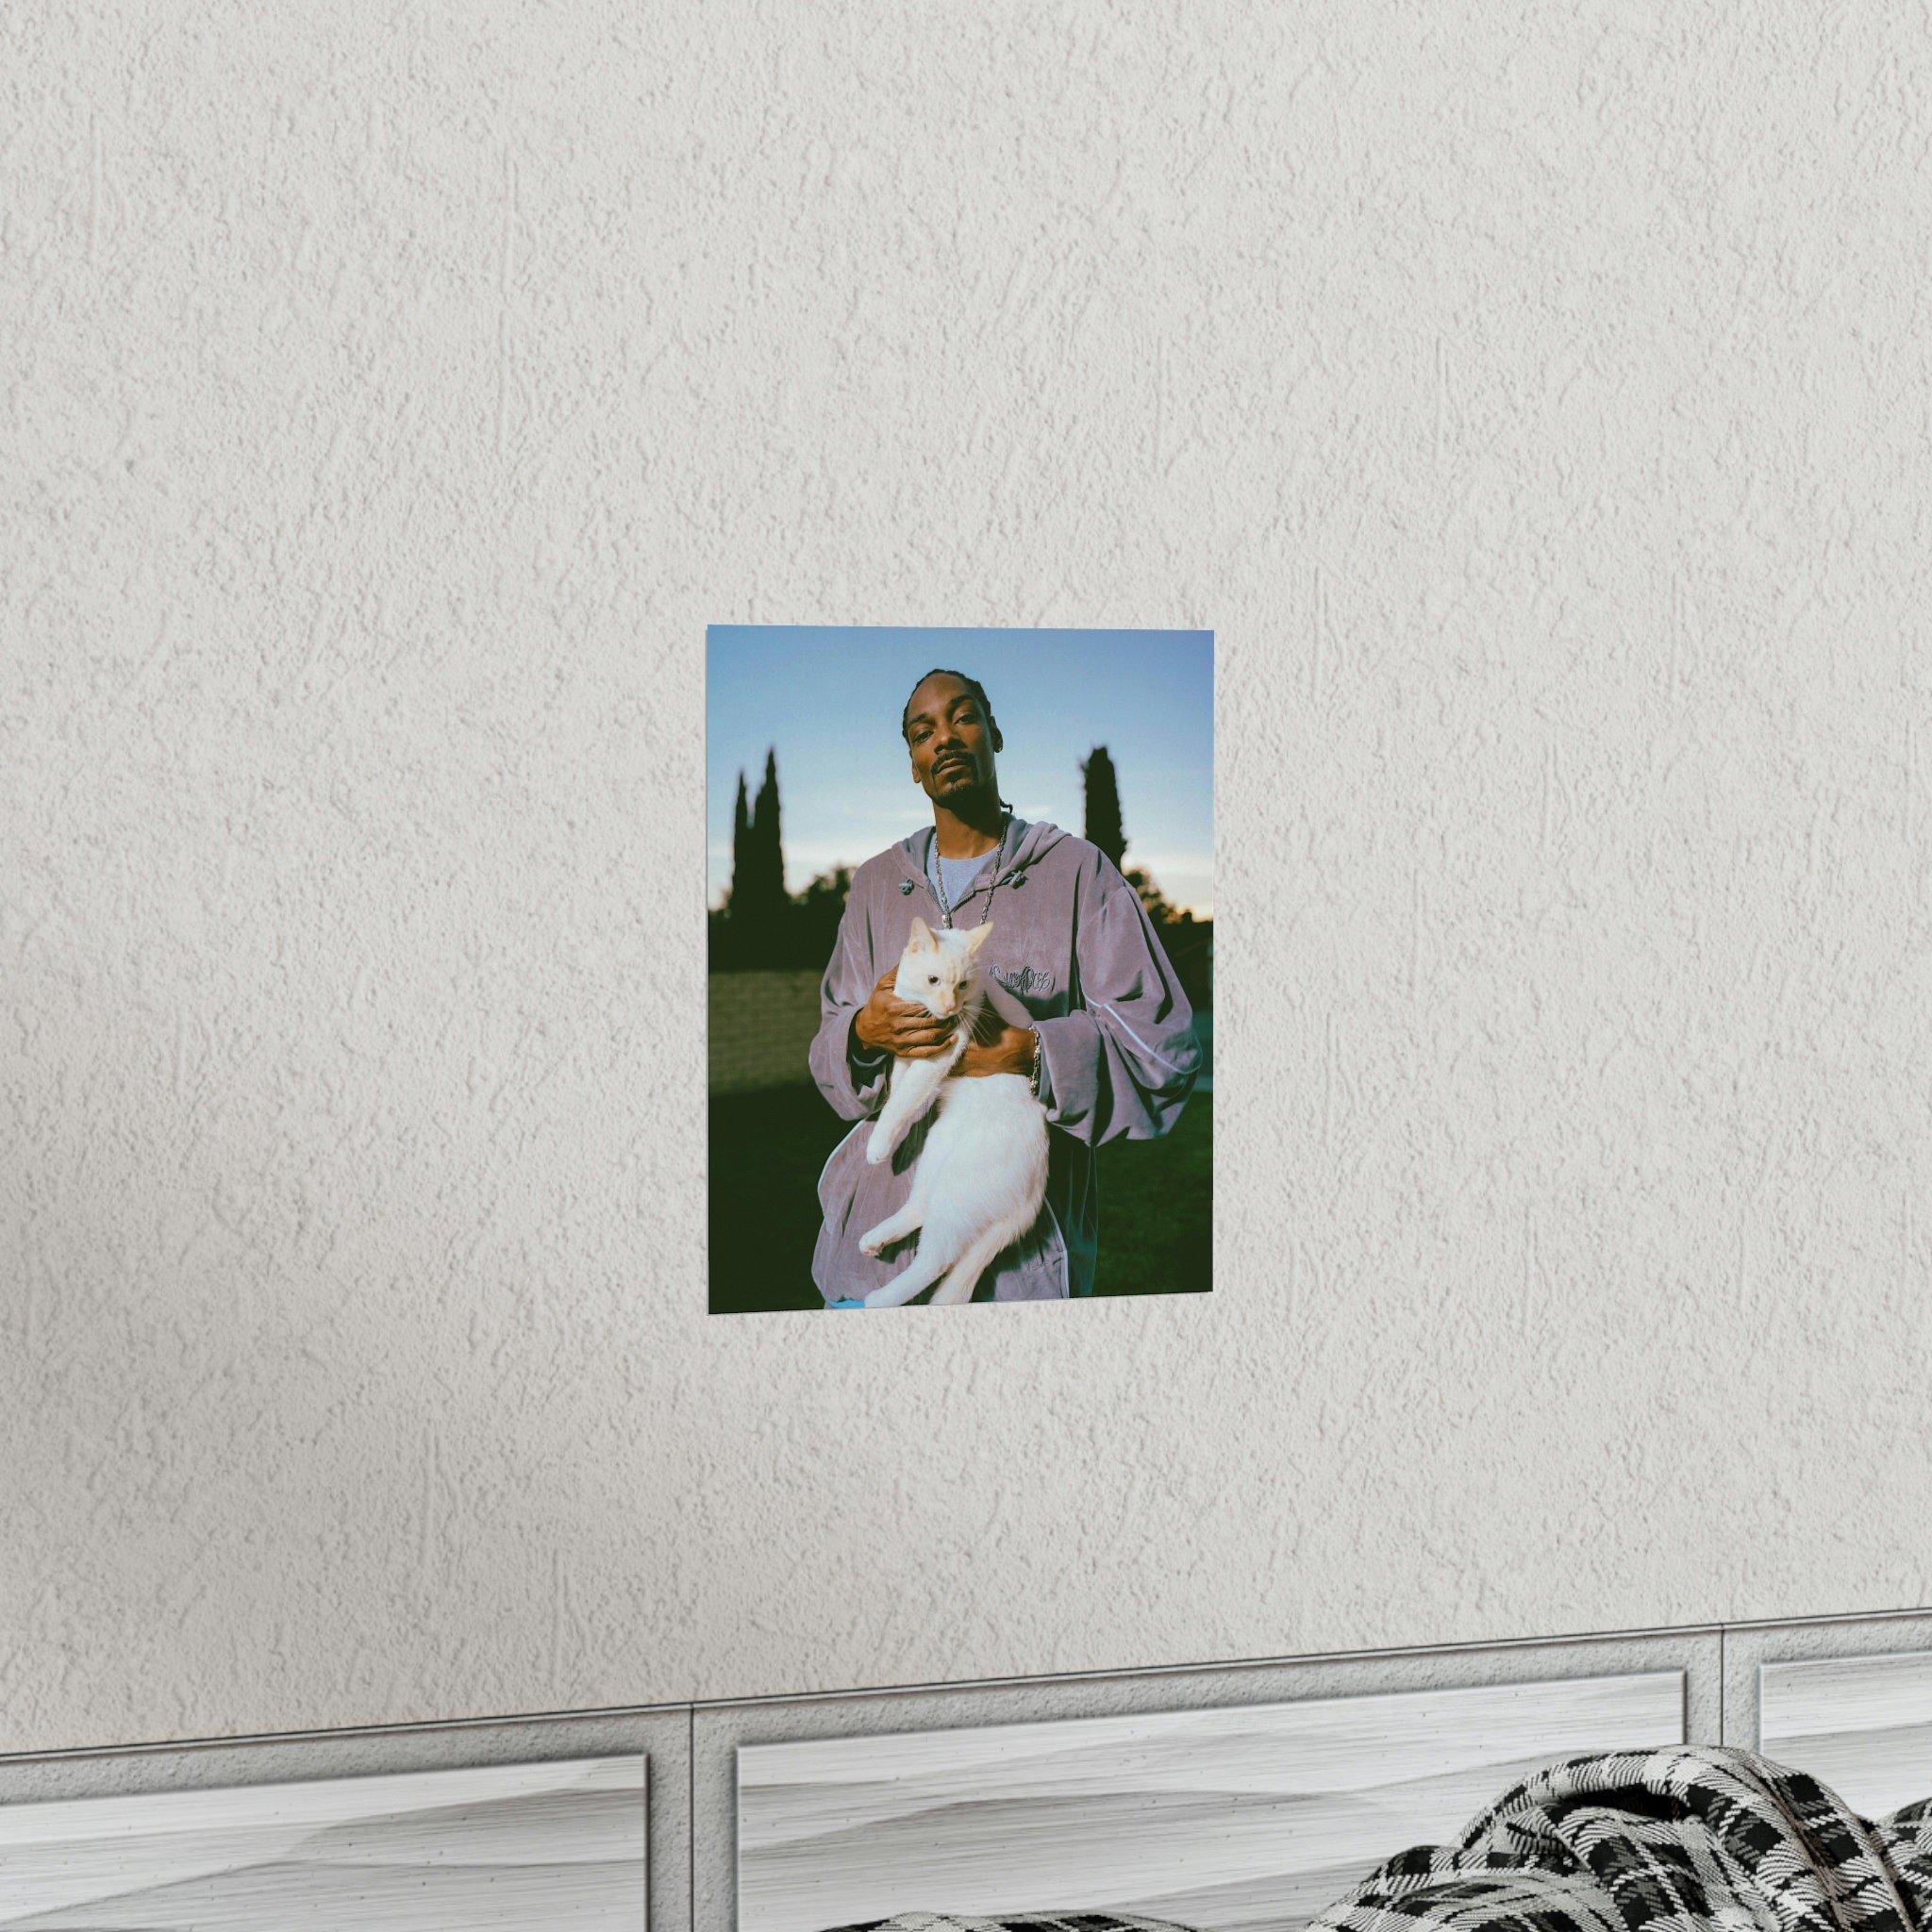 Snoop Dogg Posters - Matte Vertical Posters - Hip Hop Poster